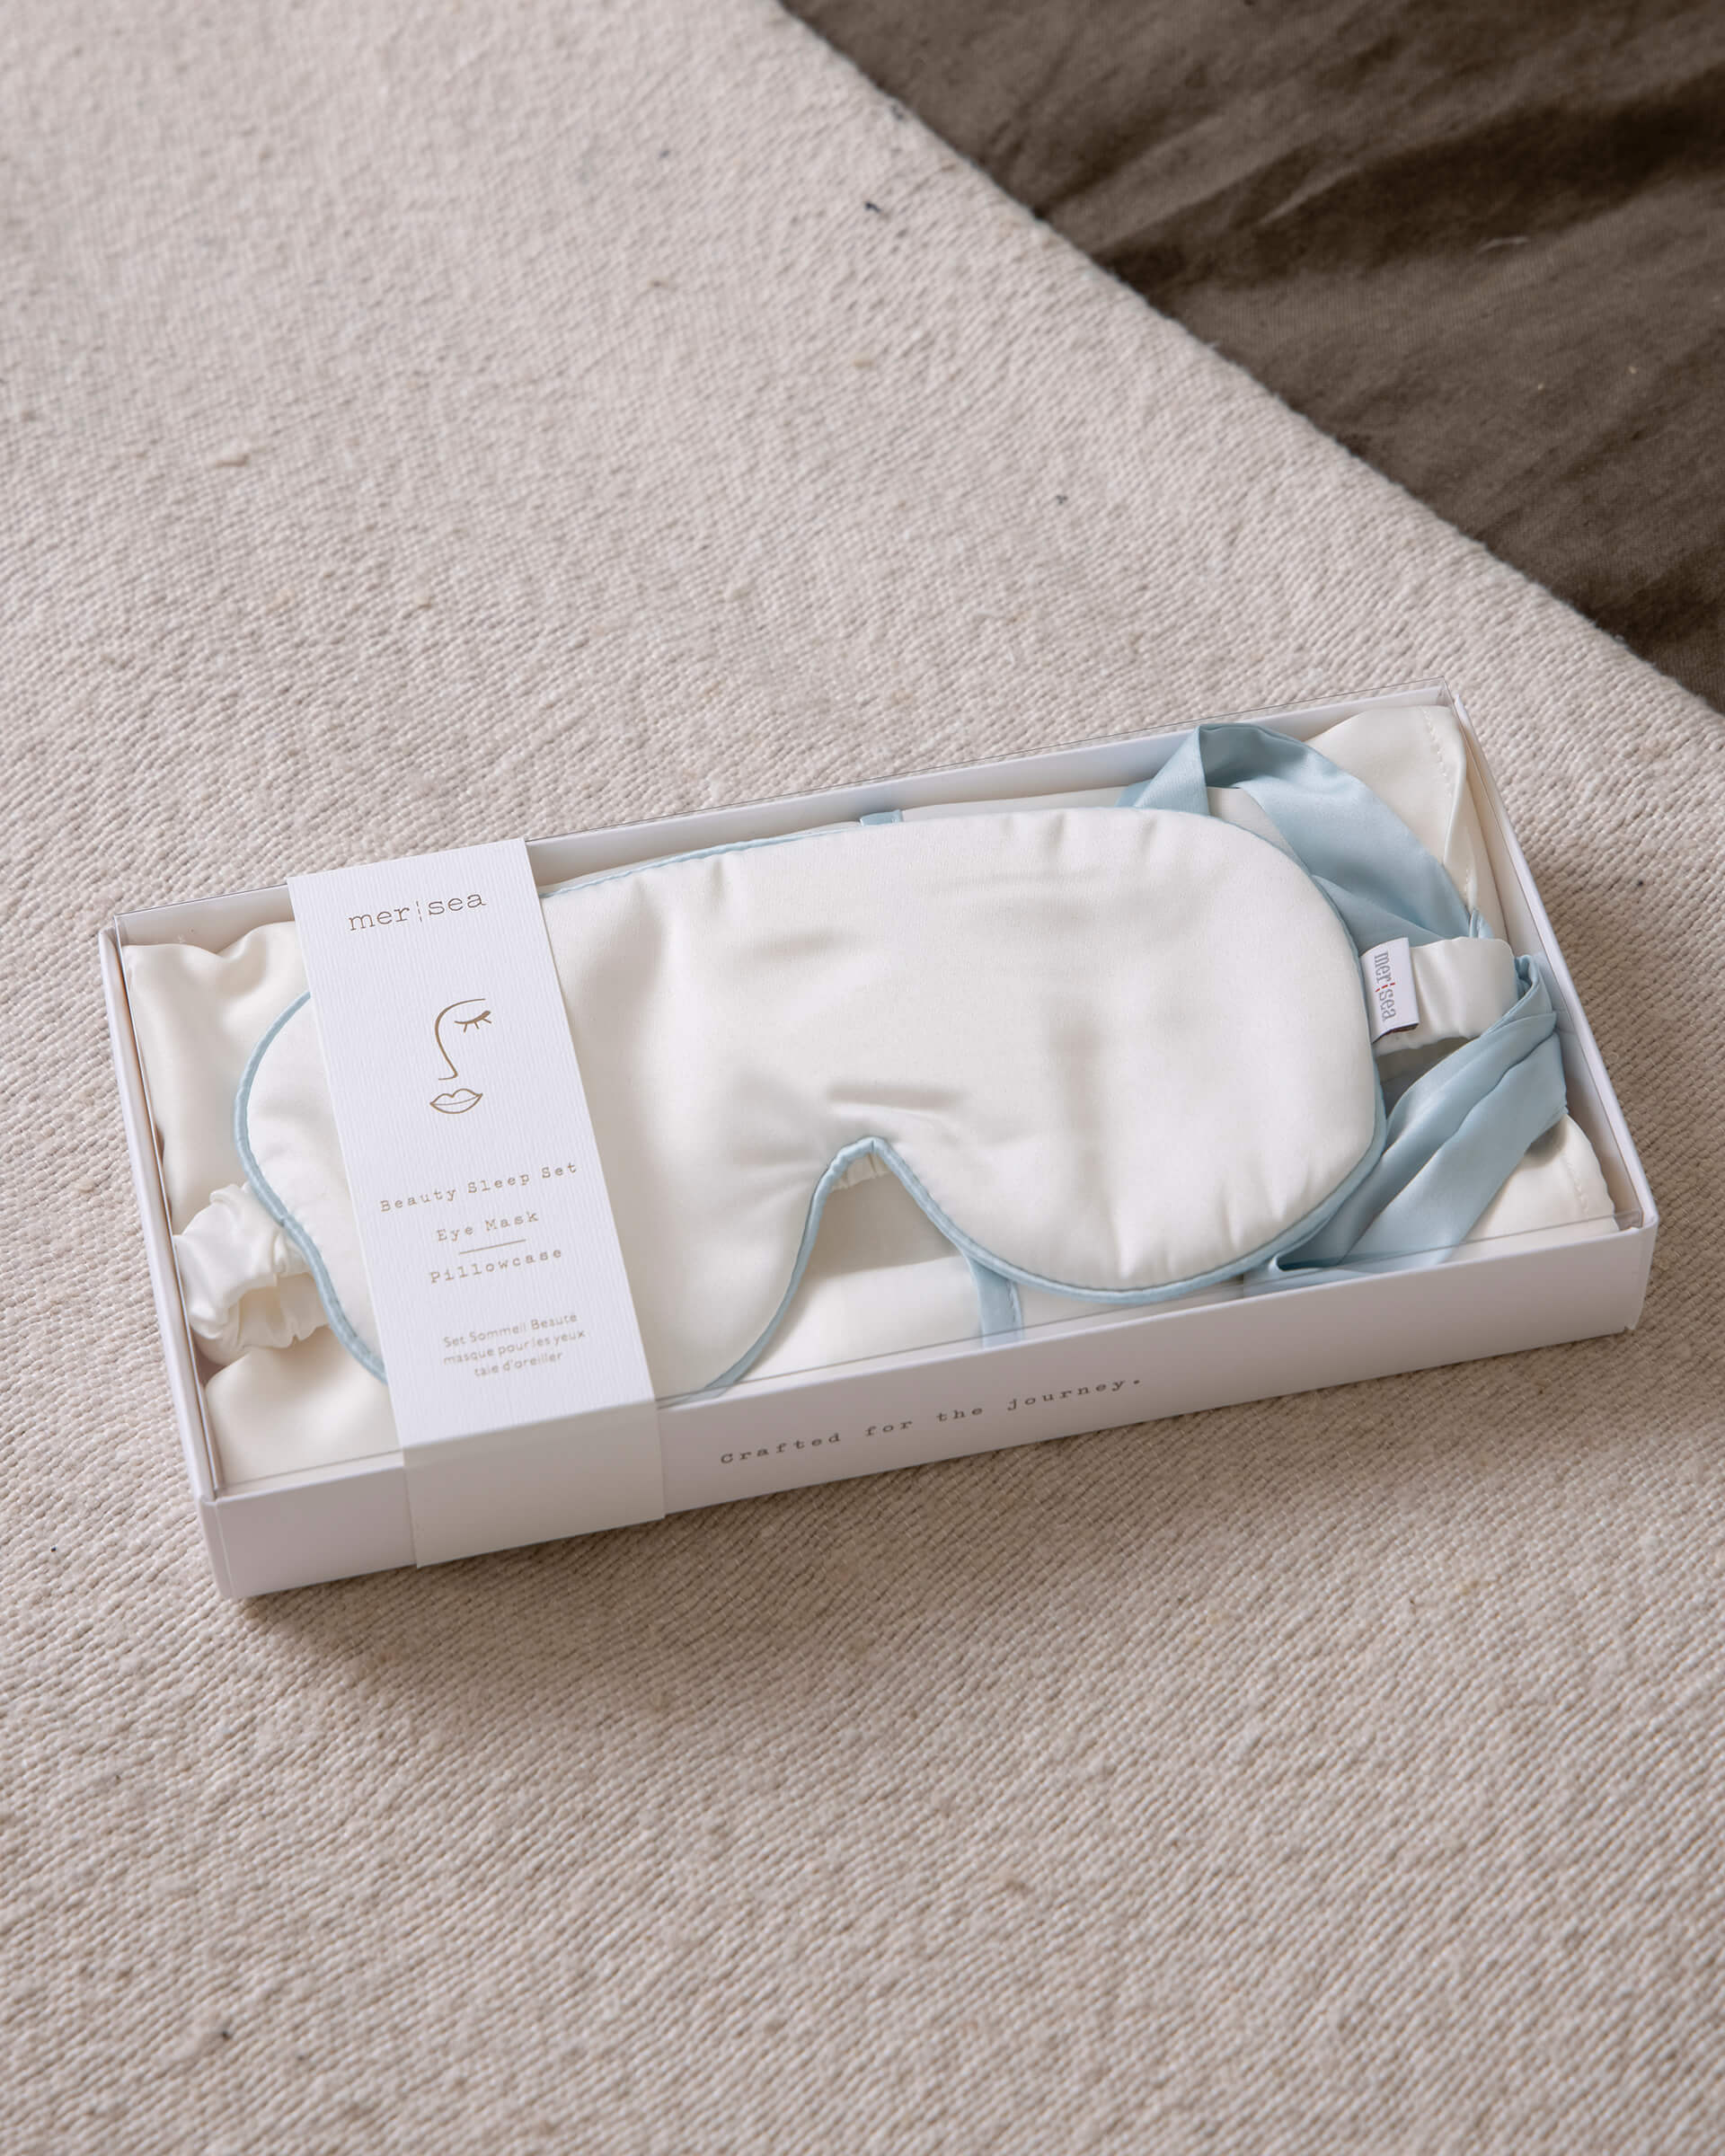 white satin sleep mask with light blue strap in a white box sitting on a neutral carpet